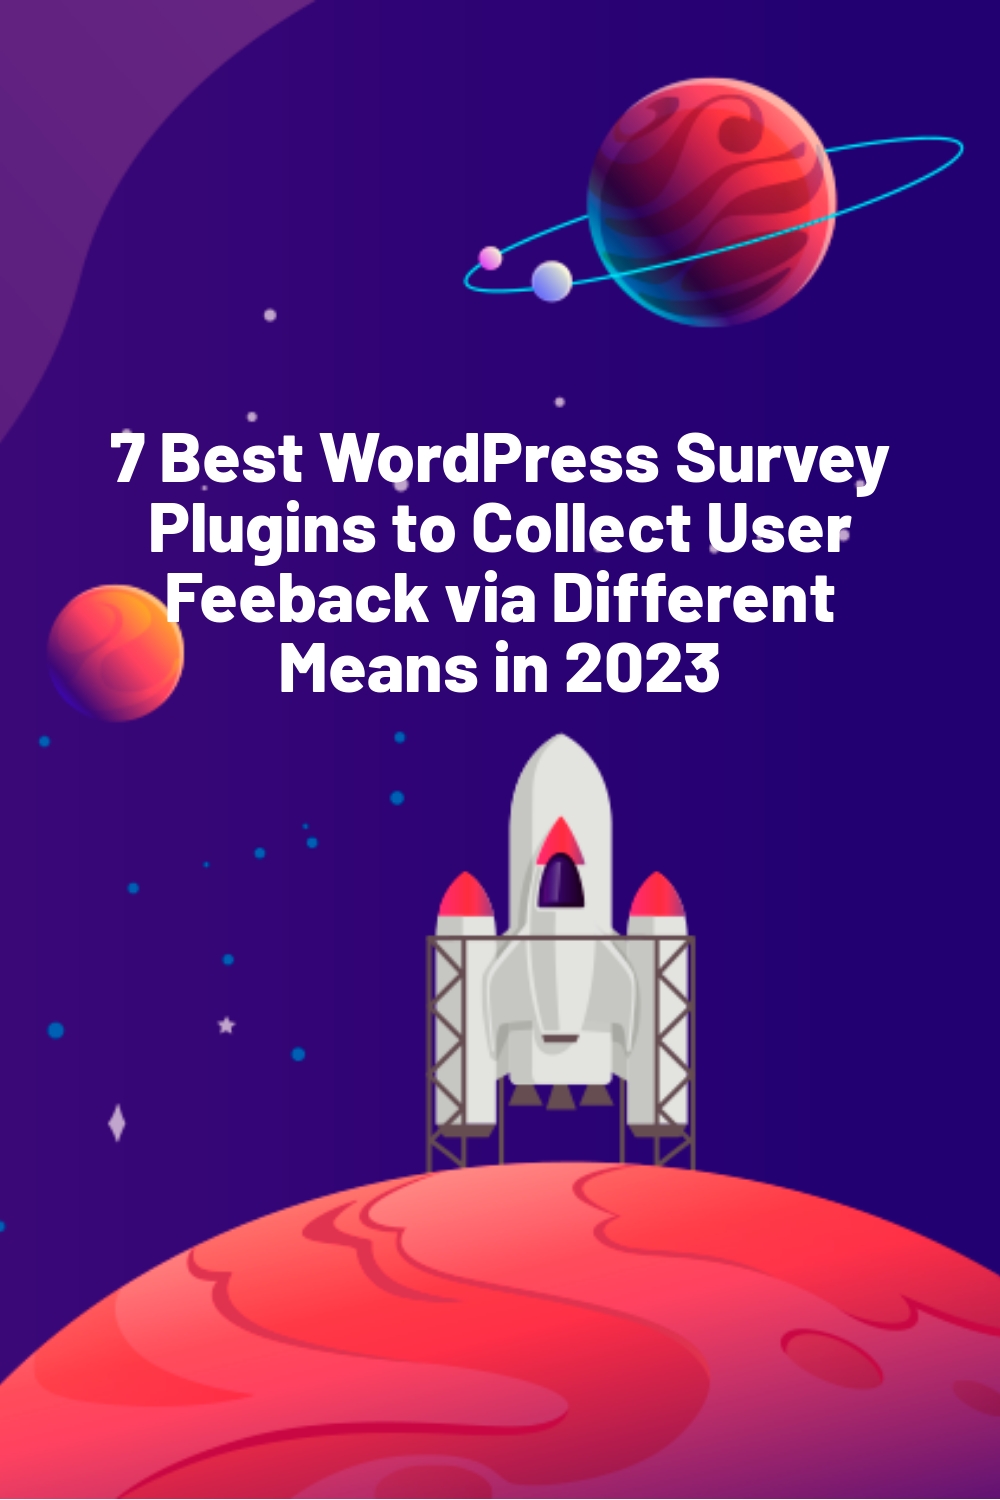 7 Best WordPress Survey Plugins to Collect User Feeback via Different Means in 2023